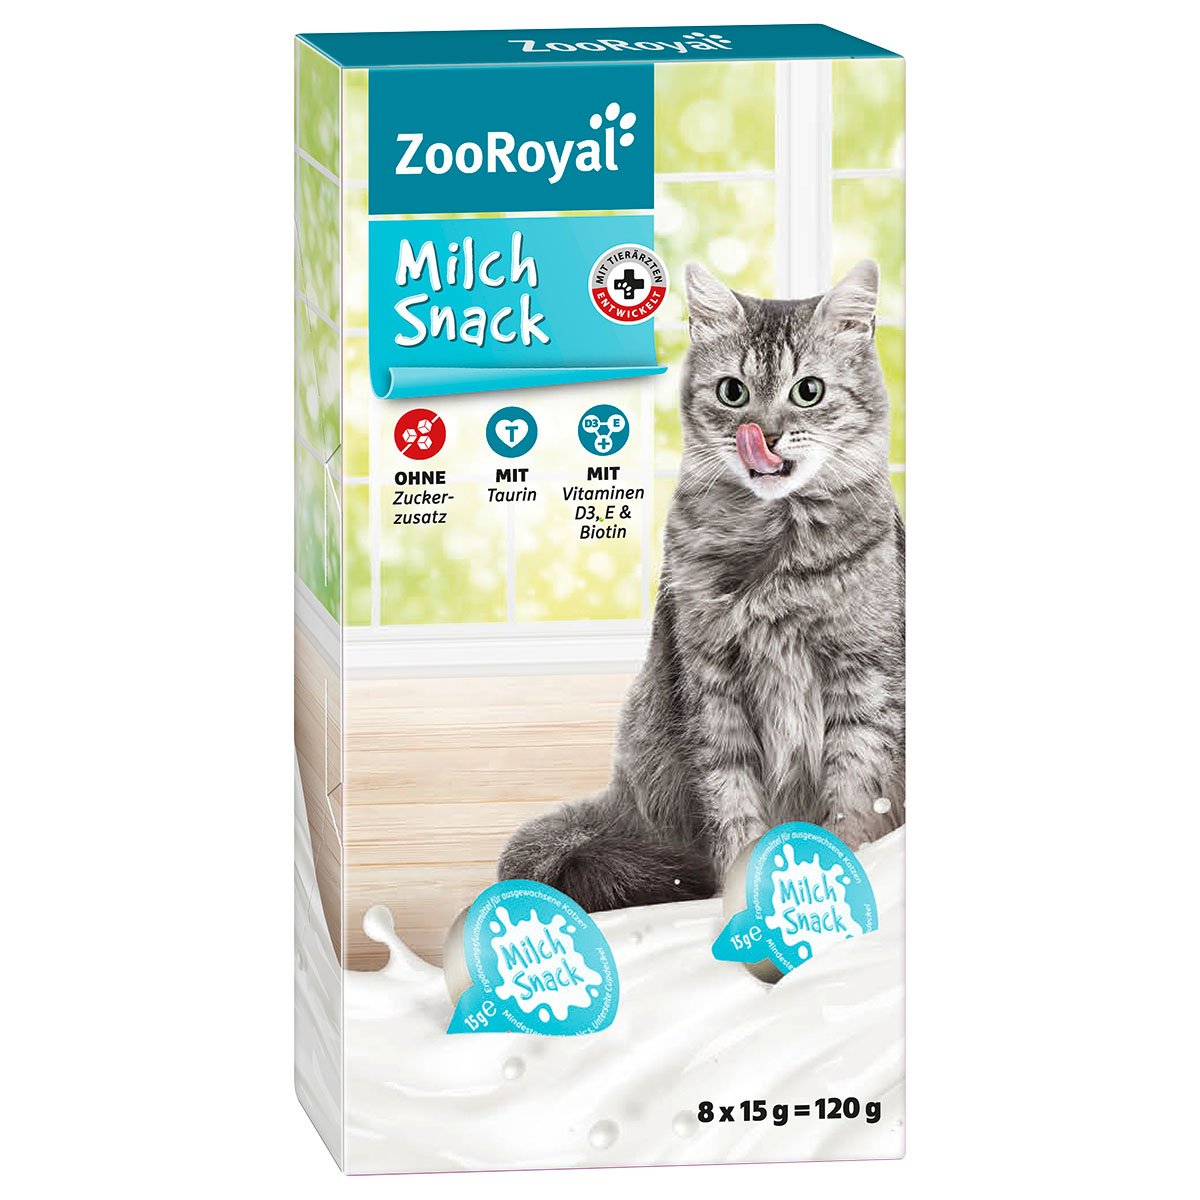 ZooRoyal Milch Snack 24x15g